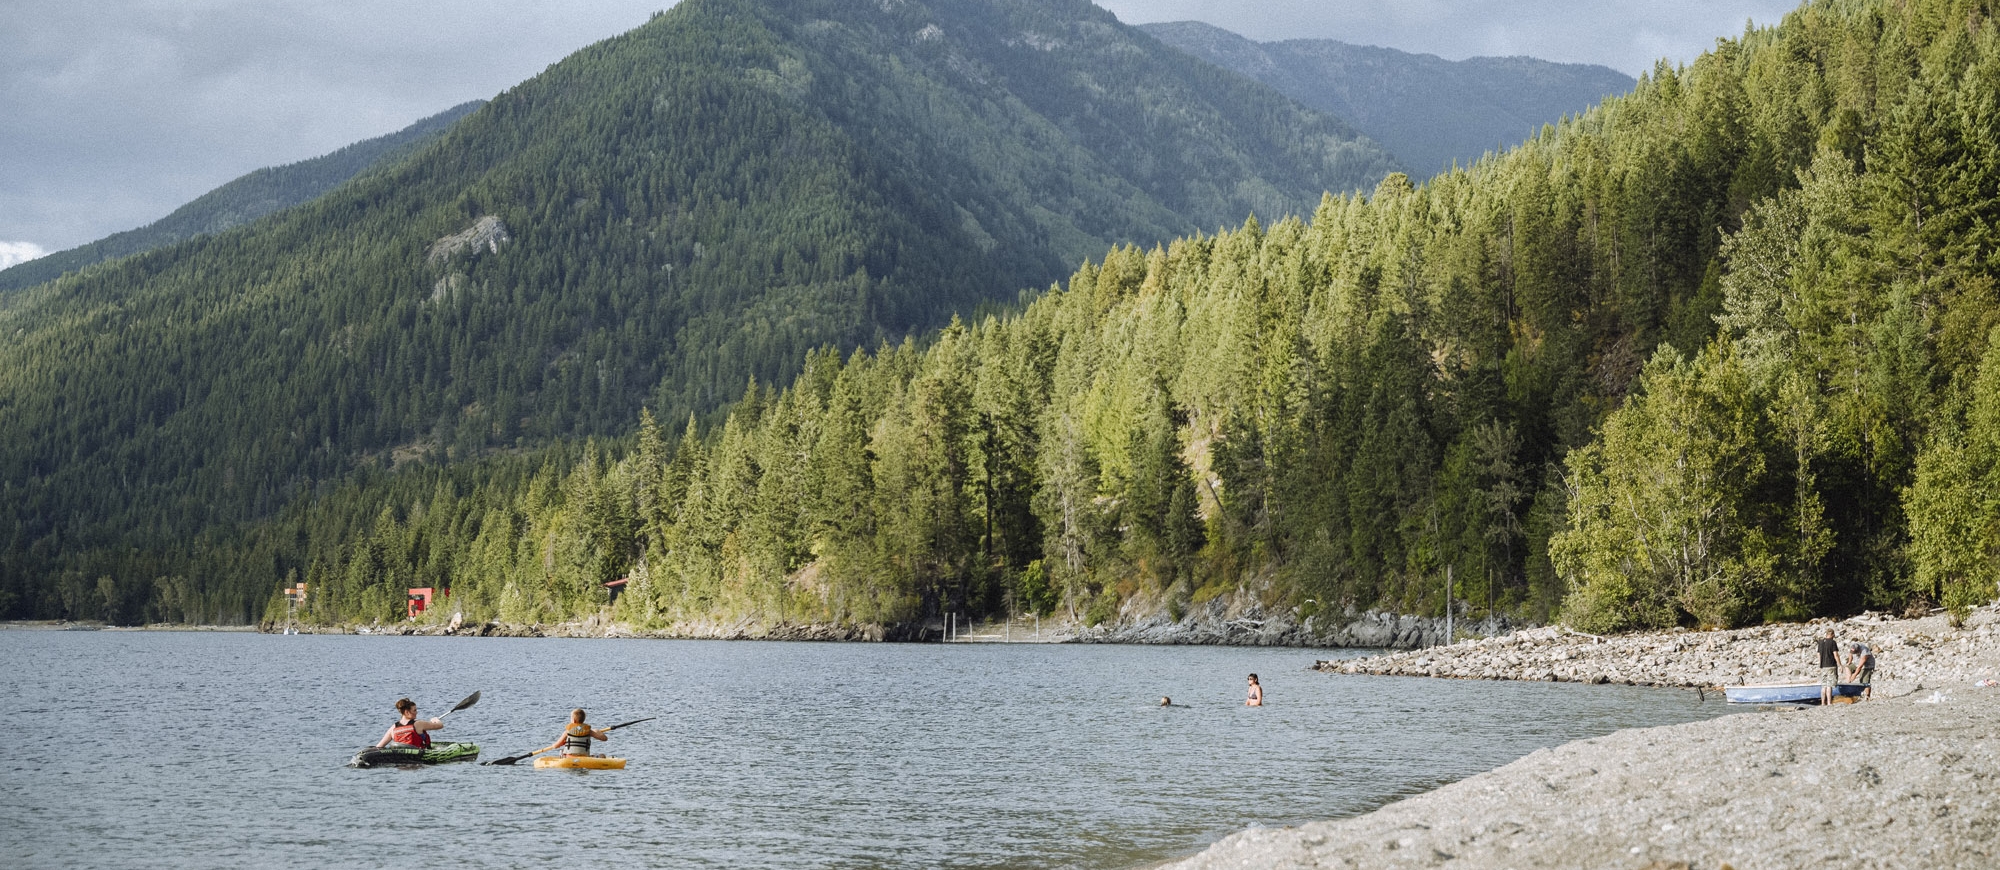 Kayakers and people on the beach with mountains in the backcountry at Lockhart Beach Provincial Park near Crawford Bay, BC